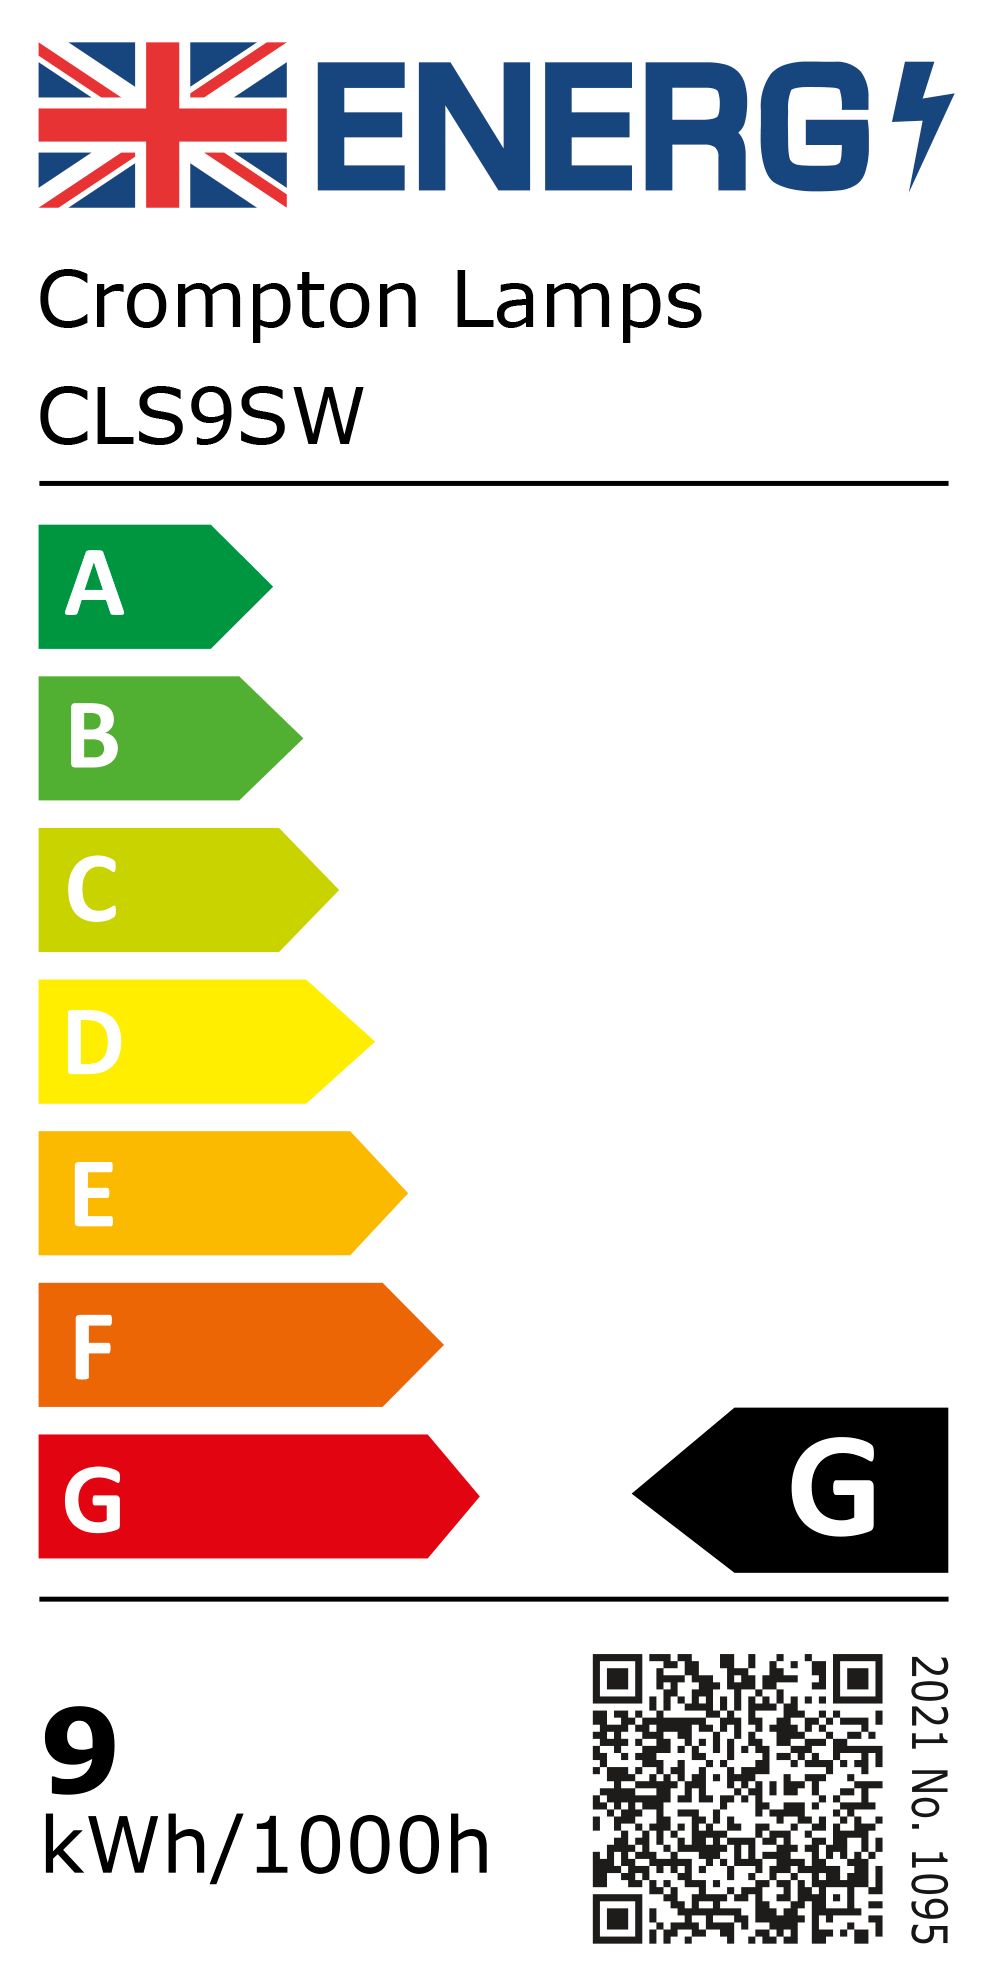 New 2021 Energy Rating Label: Stock Code CLS9SW